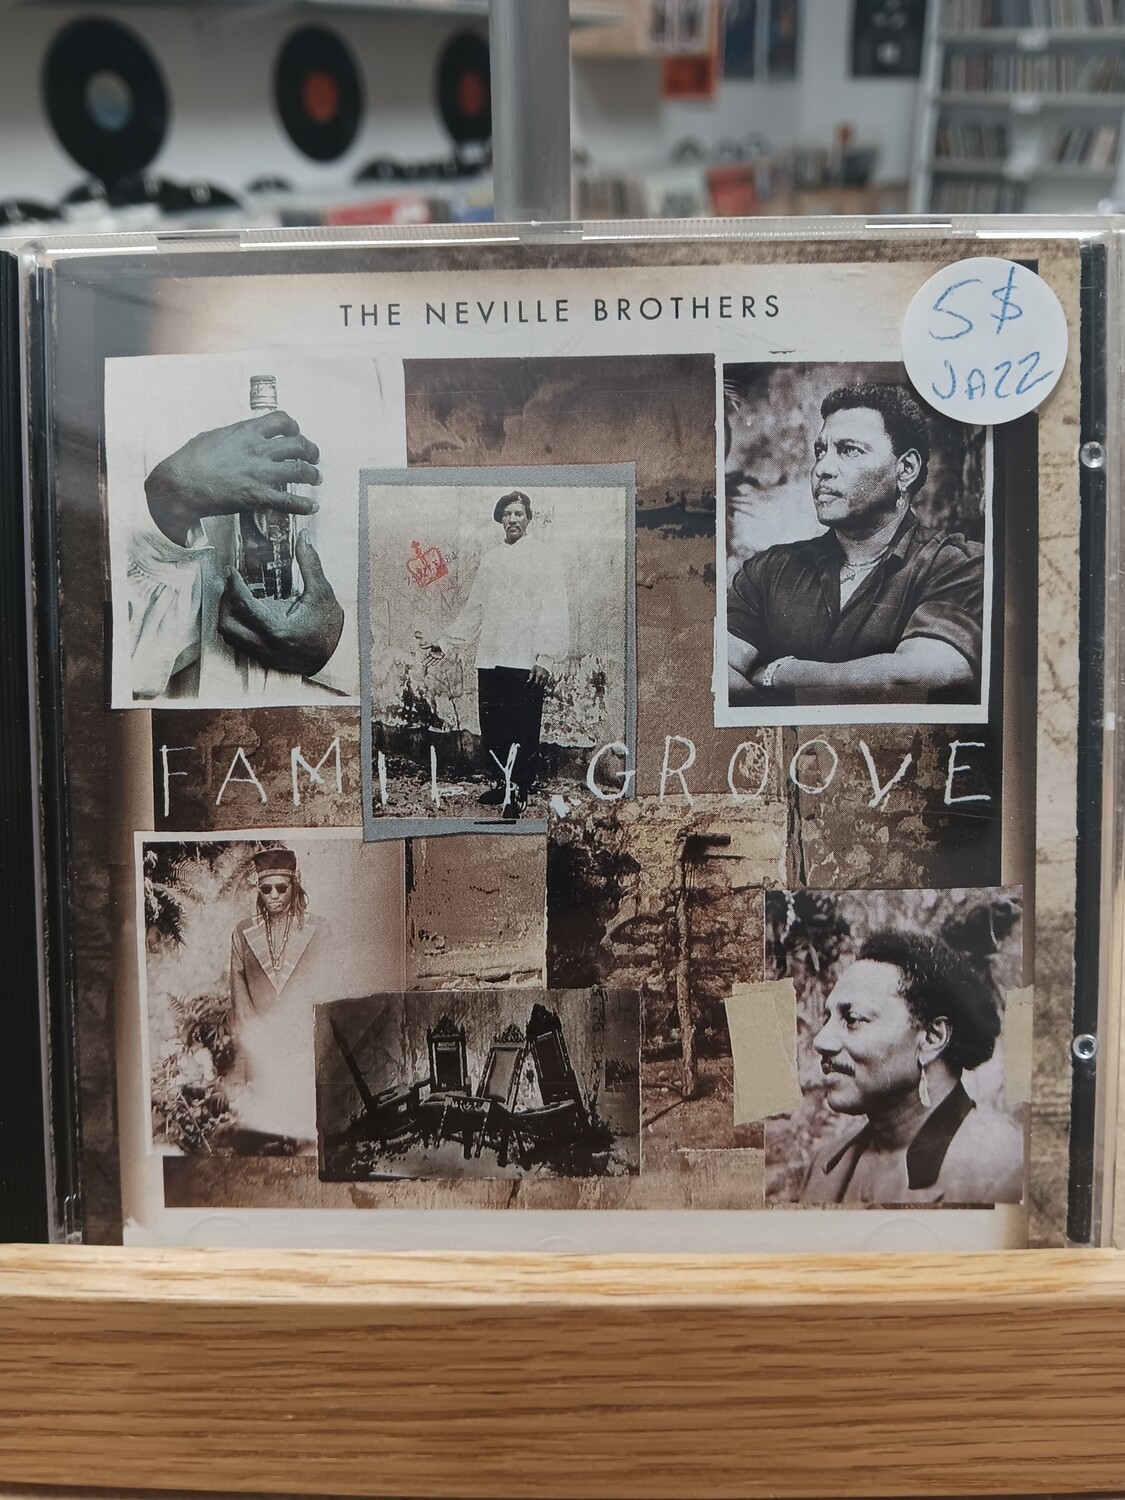 THE NEVILLE BROTHERS - Family & Groove (CD)